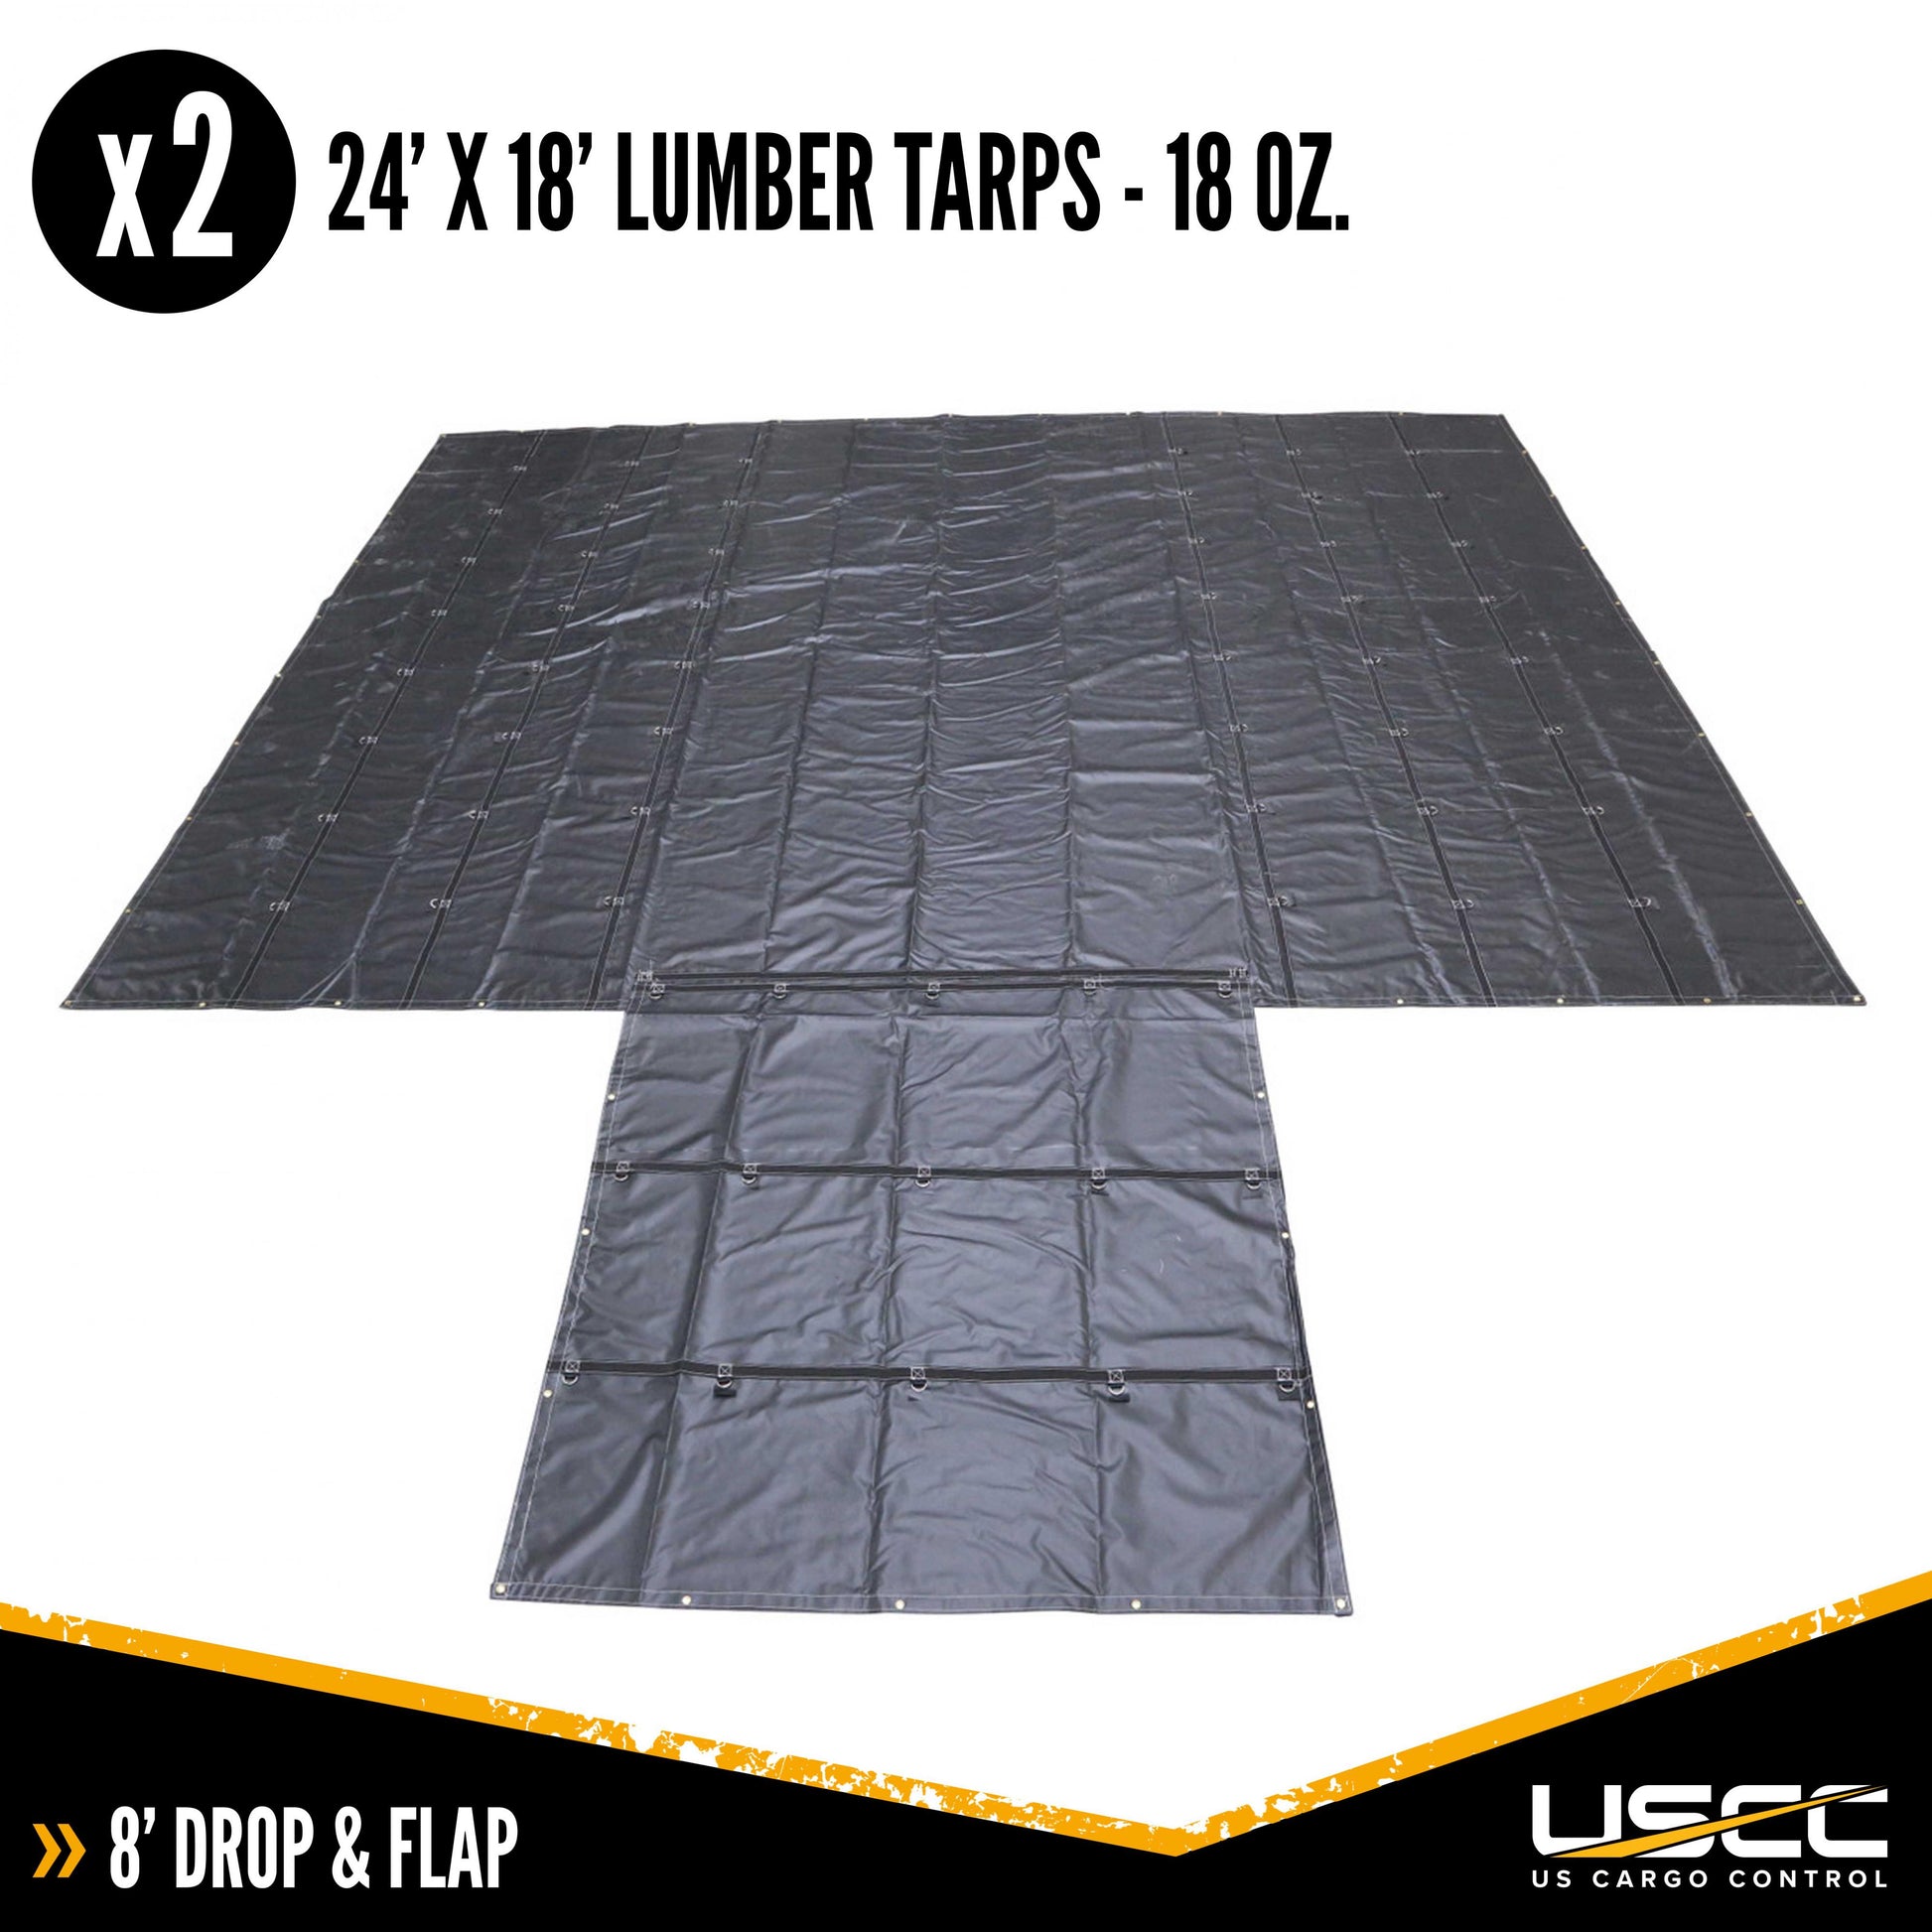 18 oz 3 Piece Lumber Tarp 24 foot x 18 foot (8 foot Drop) for all 3 pieces Black image 2 of 10